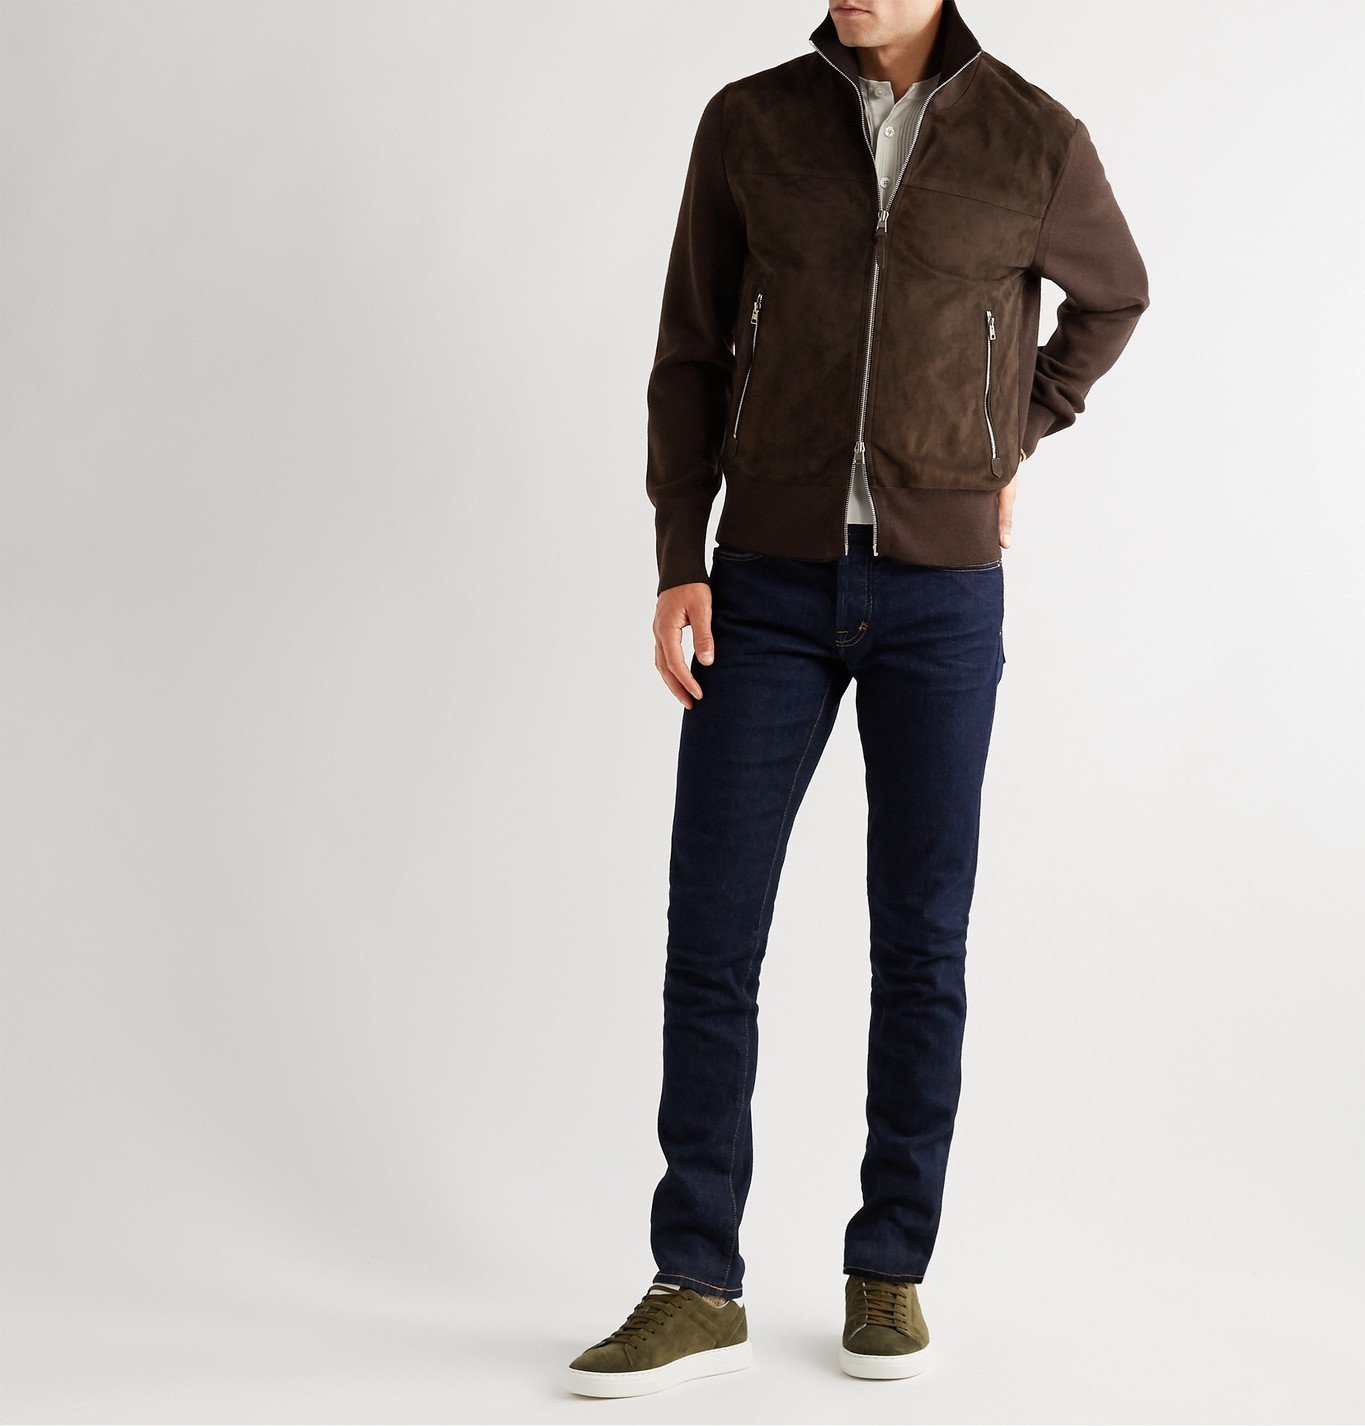 TOM FORD - Wool-Lined Suede Jacket - Brown TOM FORD